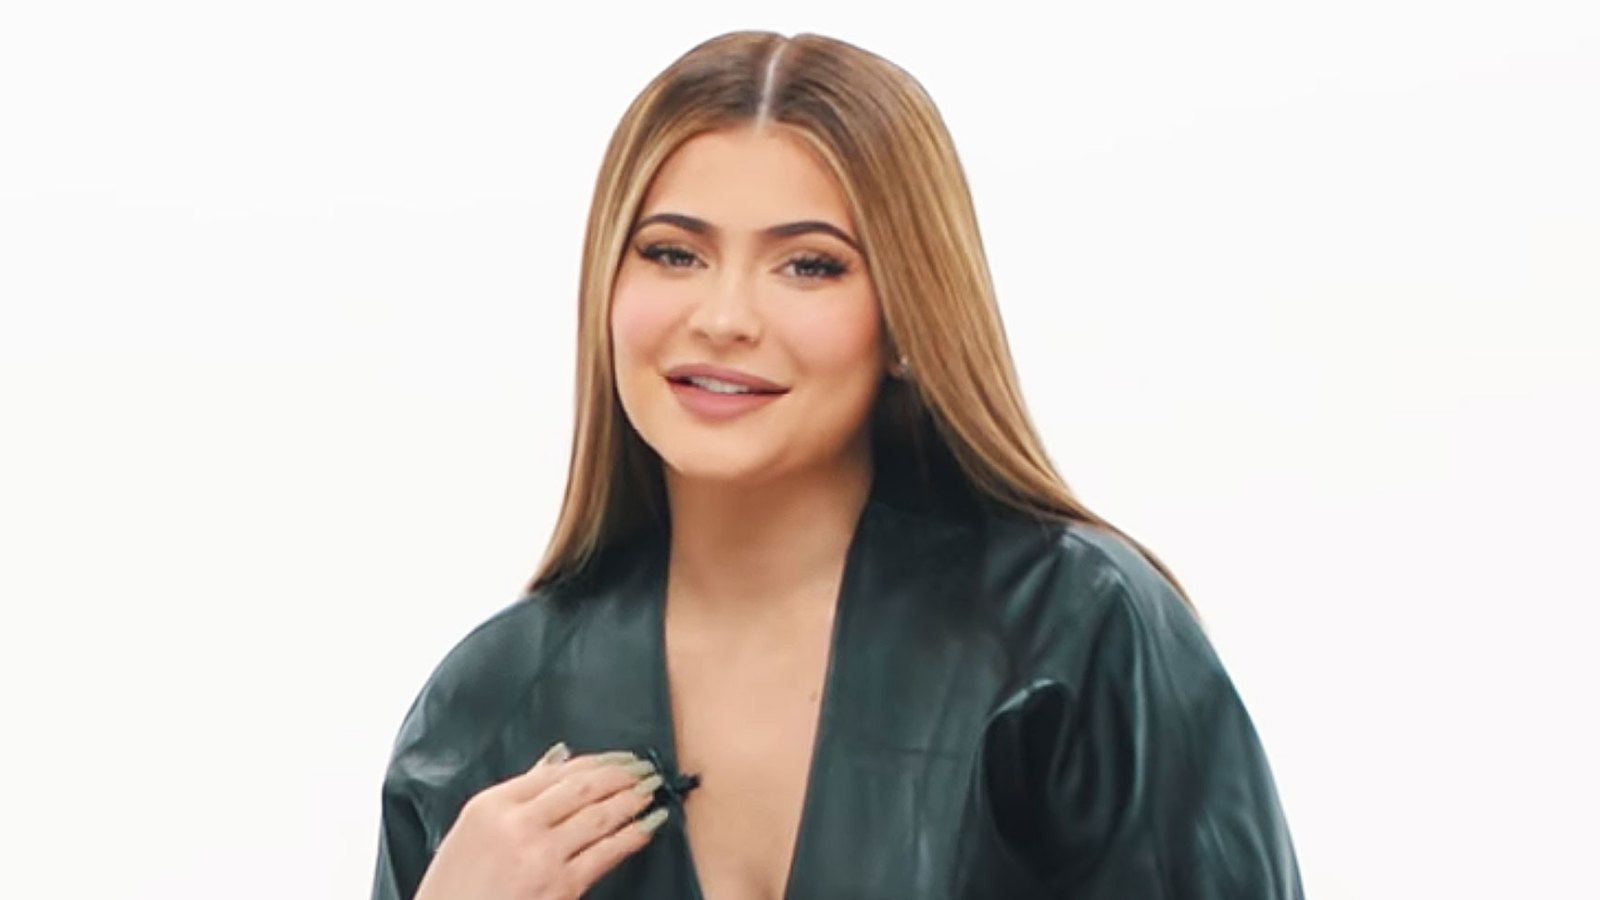 Kylie Jenner Thinks She Will be the Next of Her Friends to Have a Baby